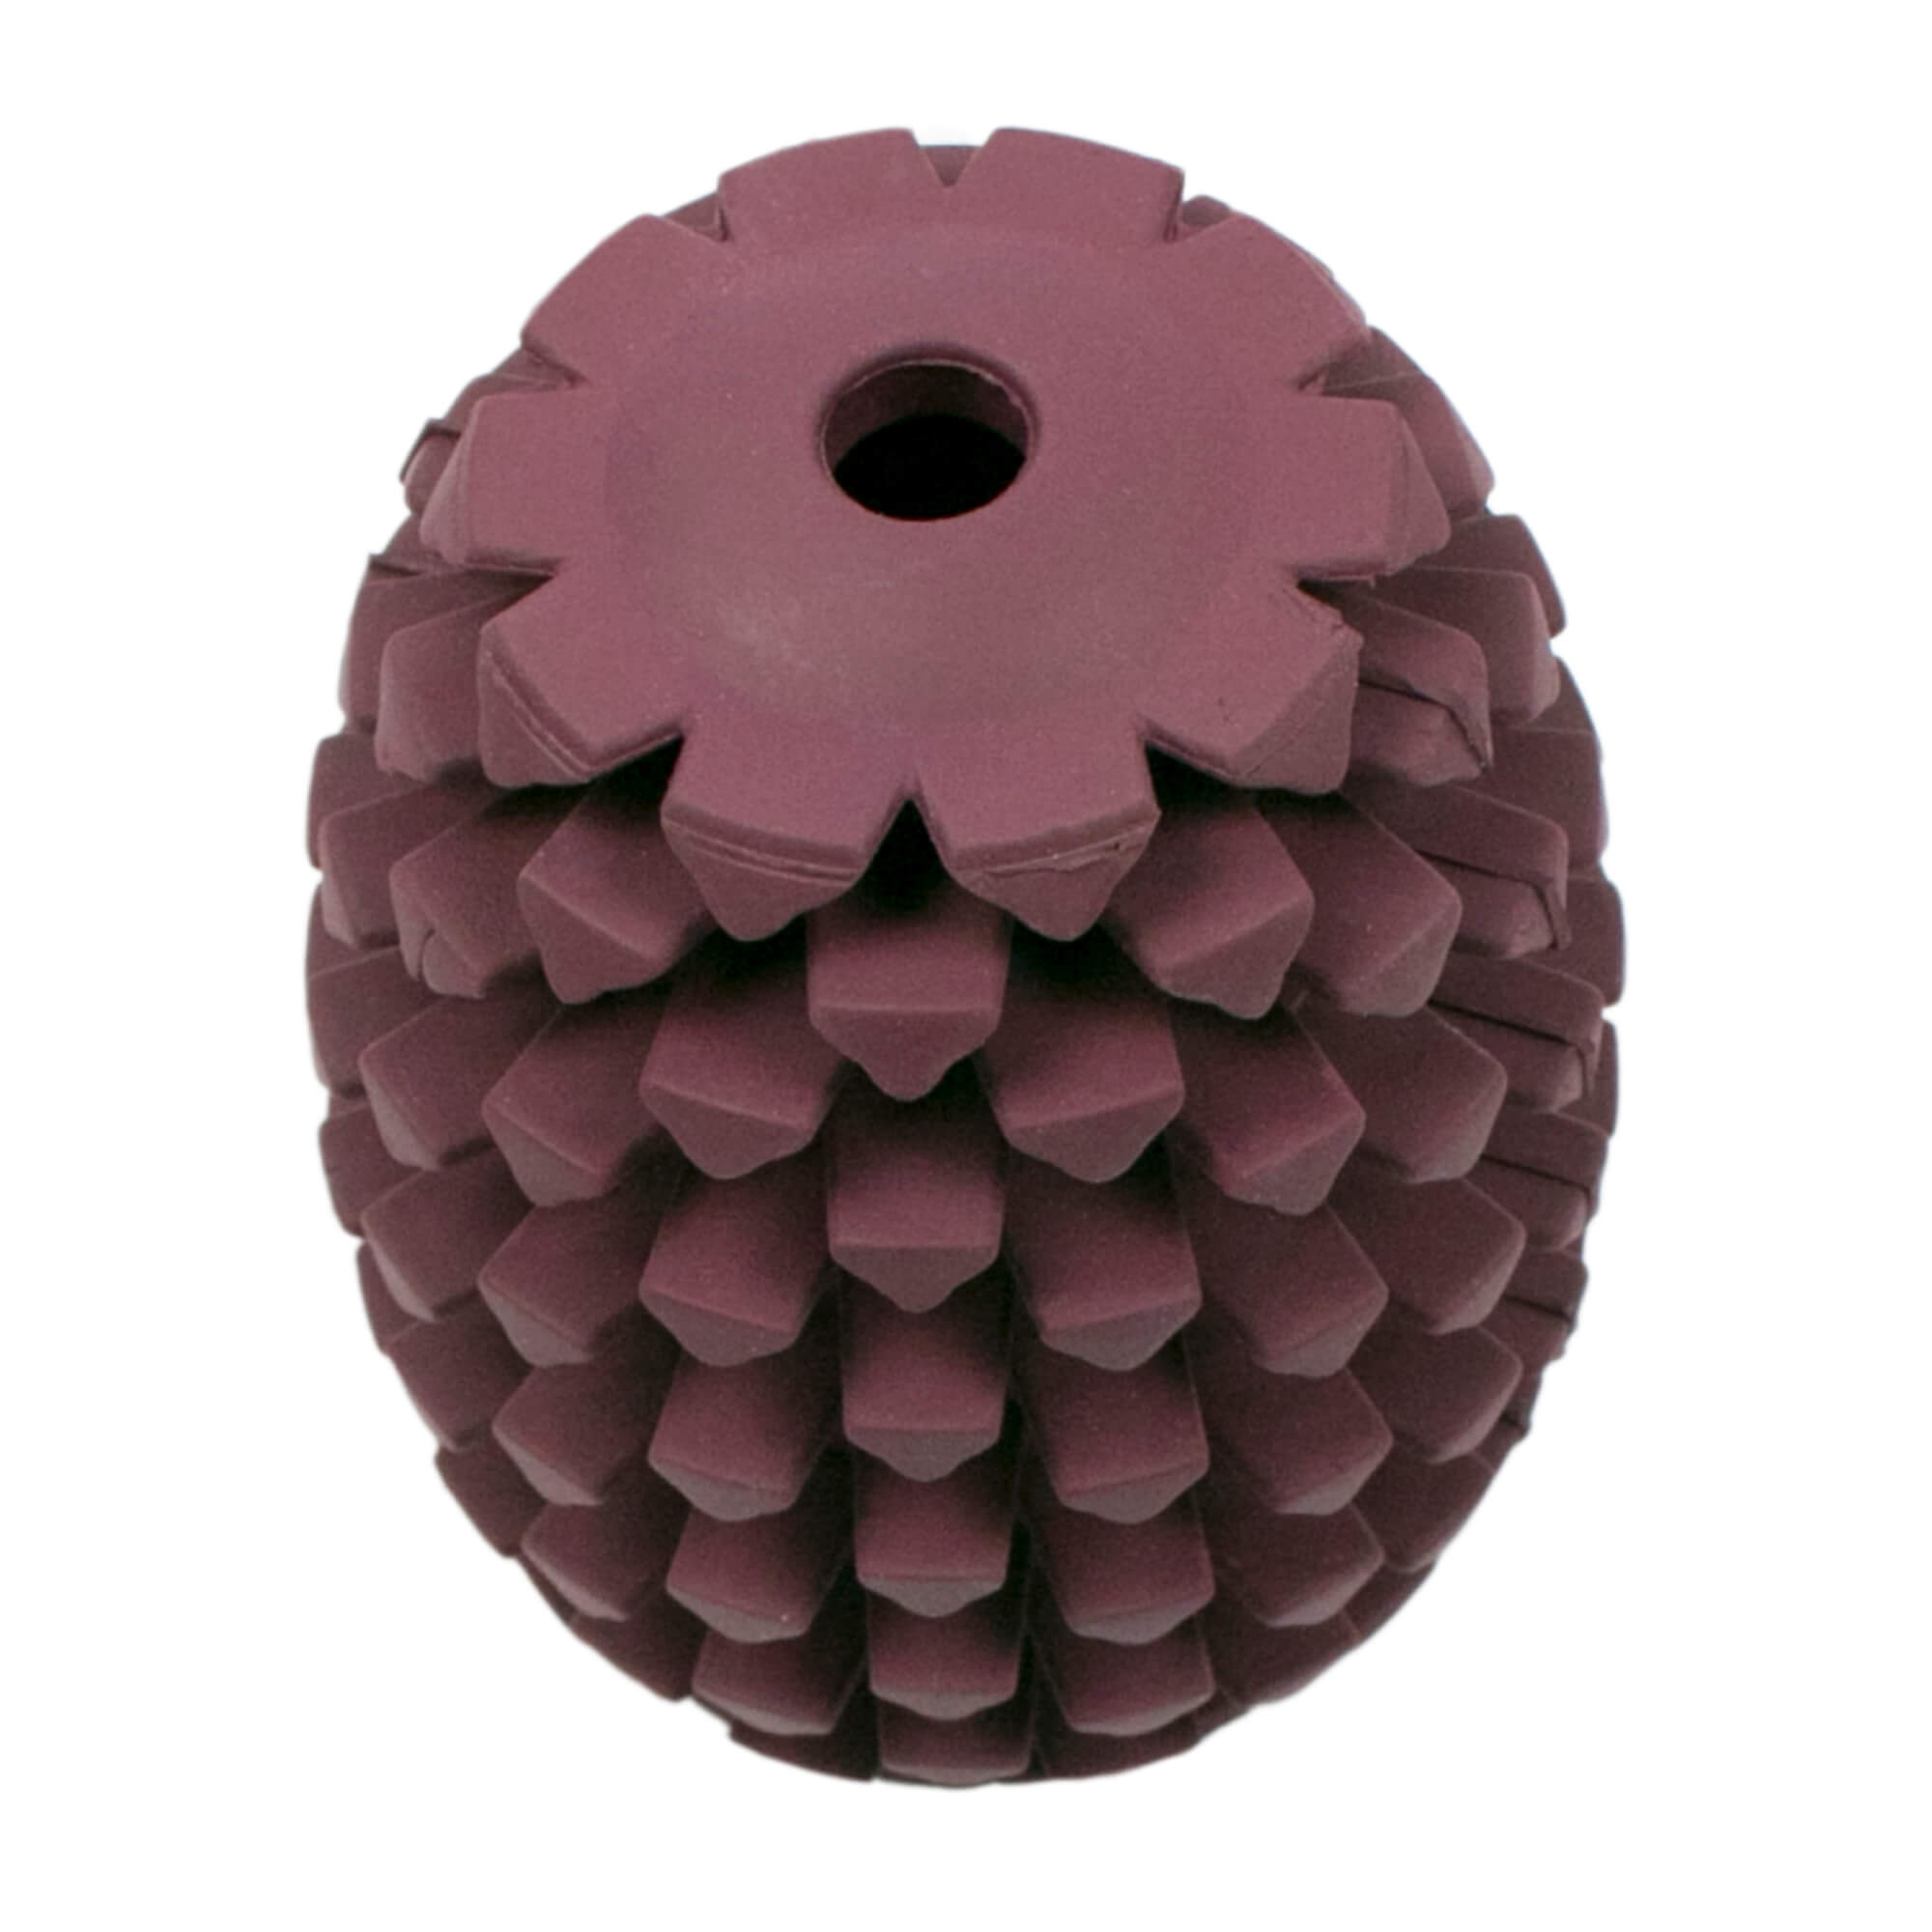 Tall Tails rubber pinecone dog toy purple top